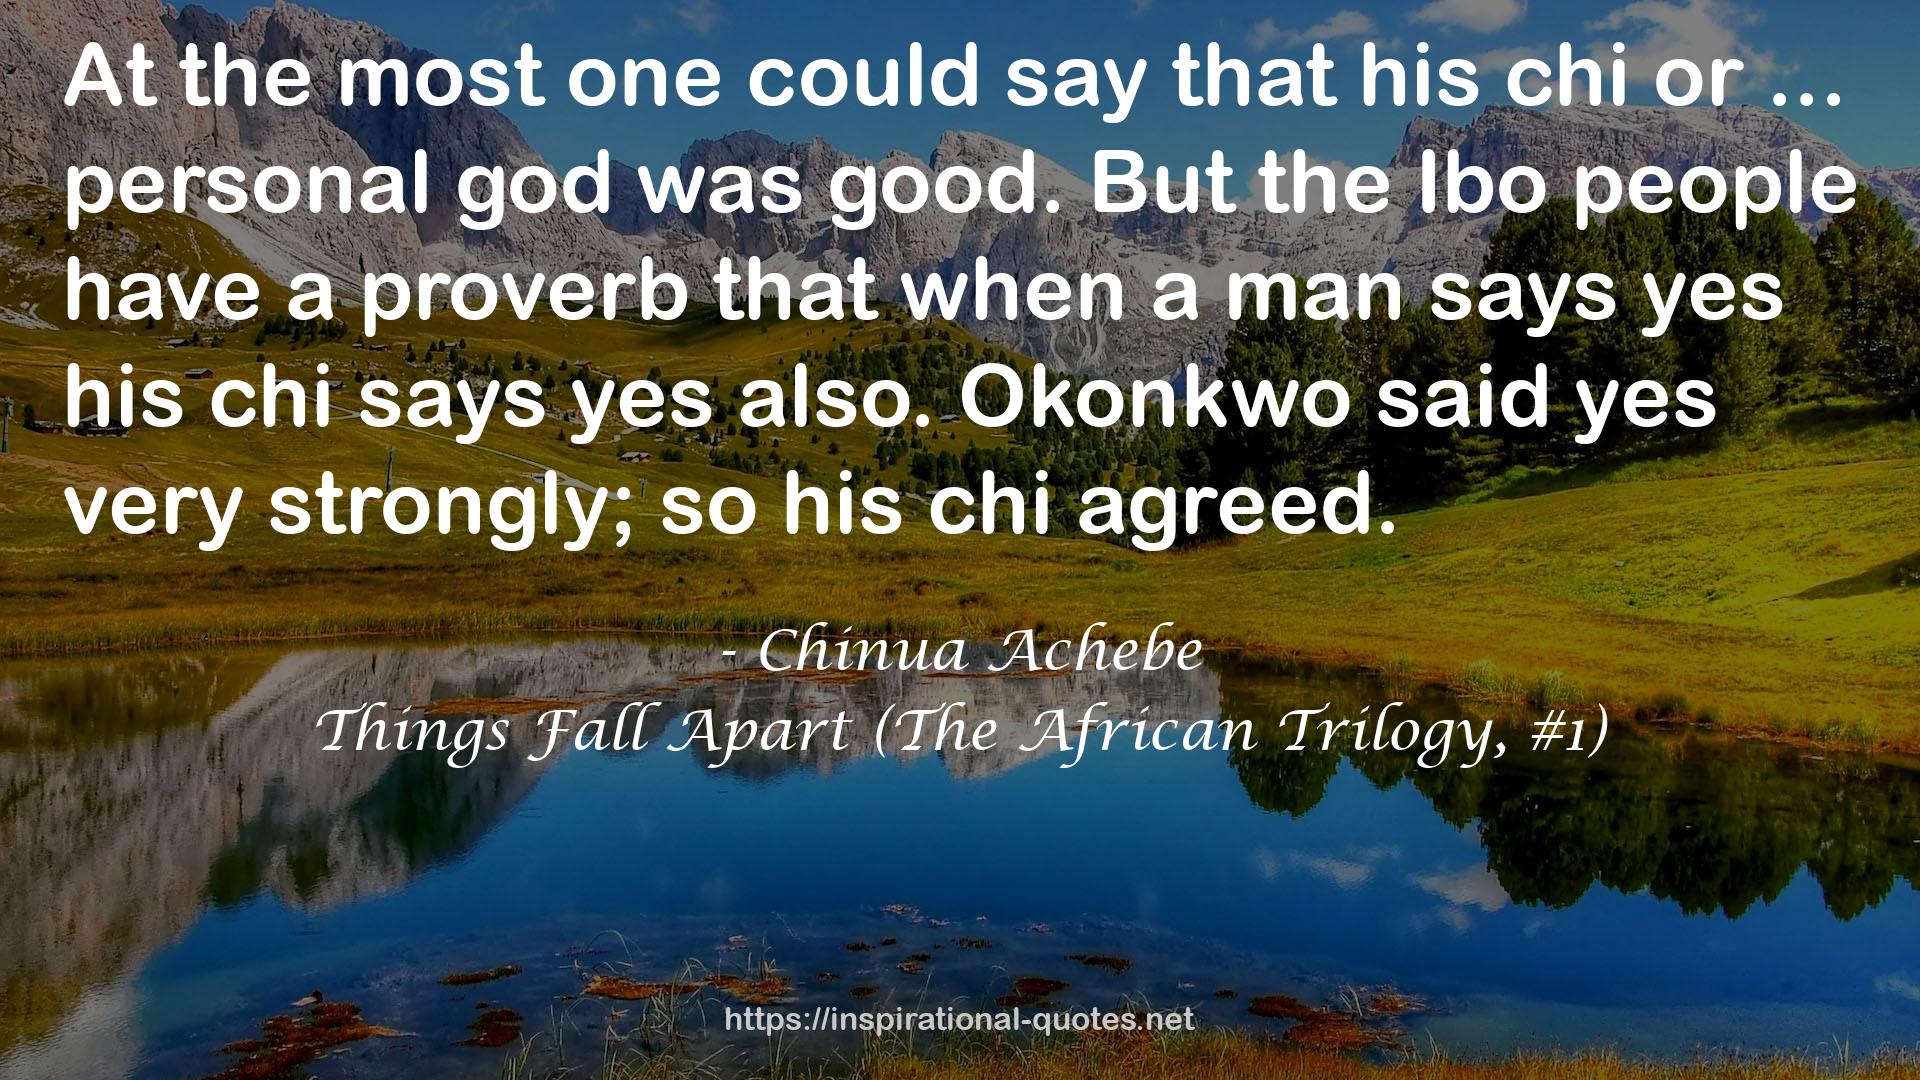 Things Fall Apart (The African Trilogy, #1) QUOTES